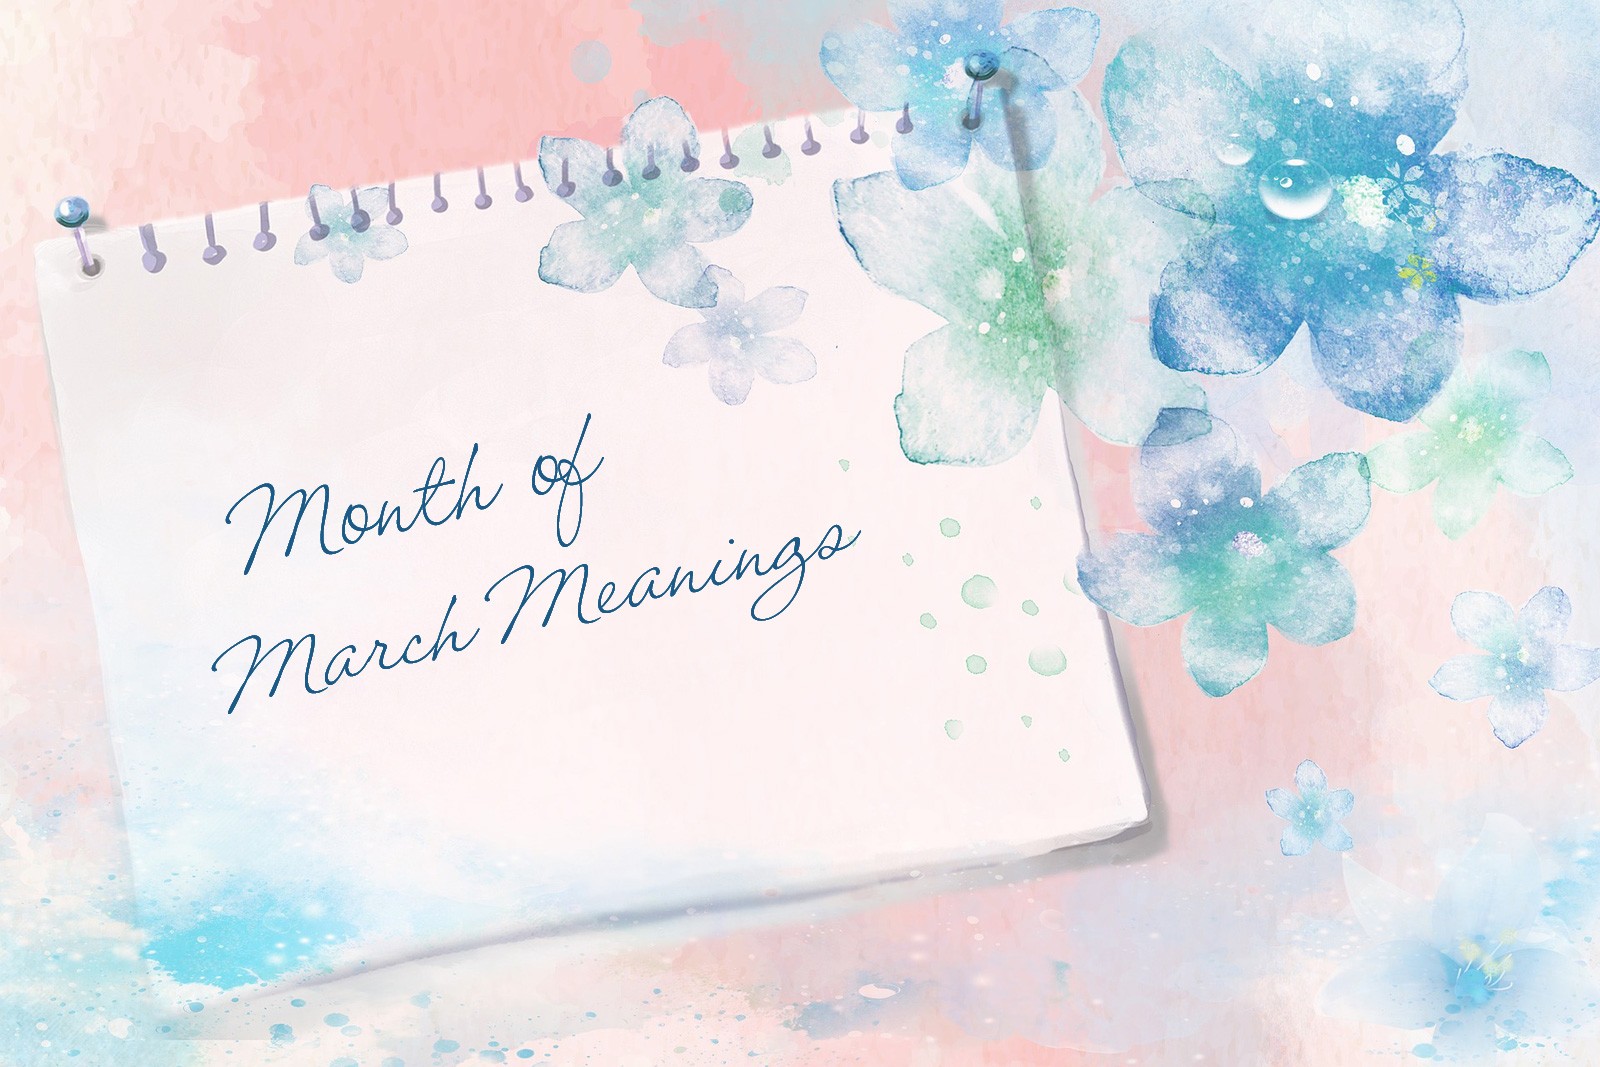 month of march meaning and symbols